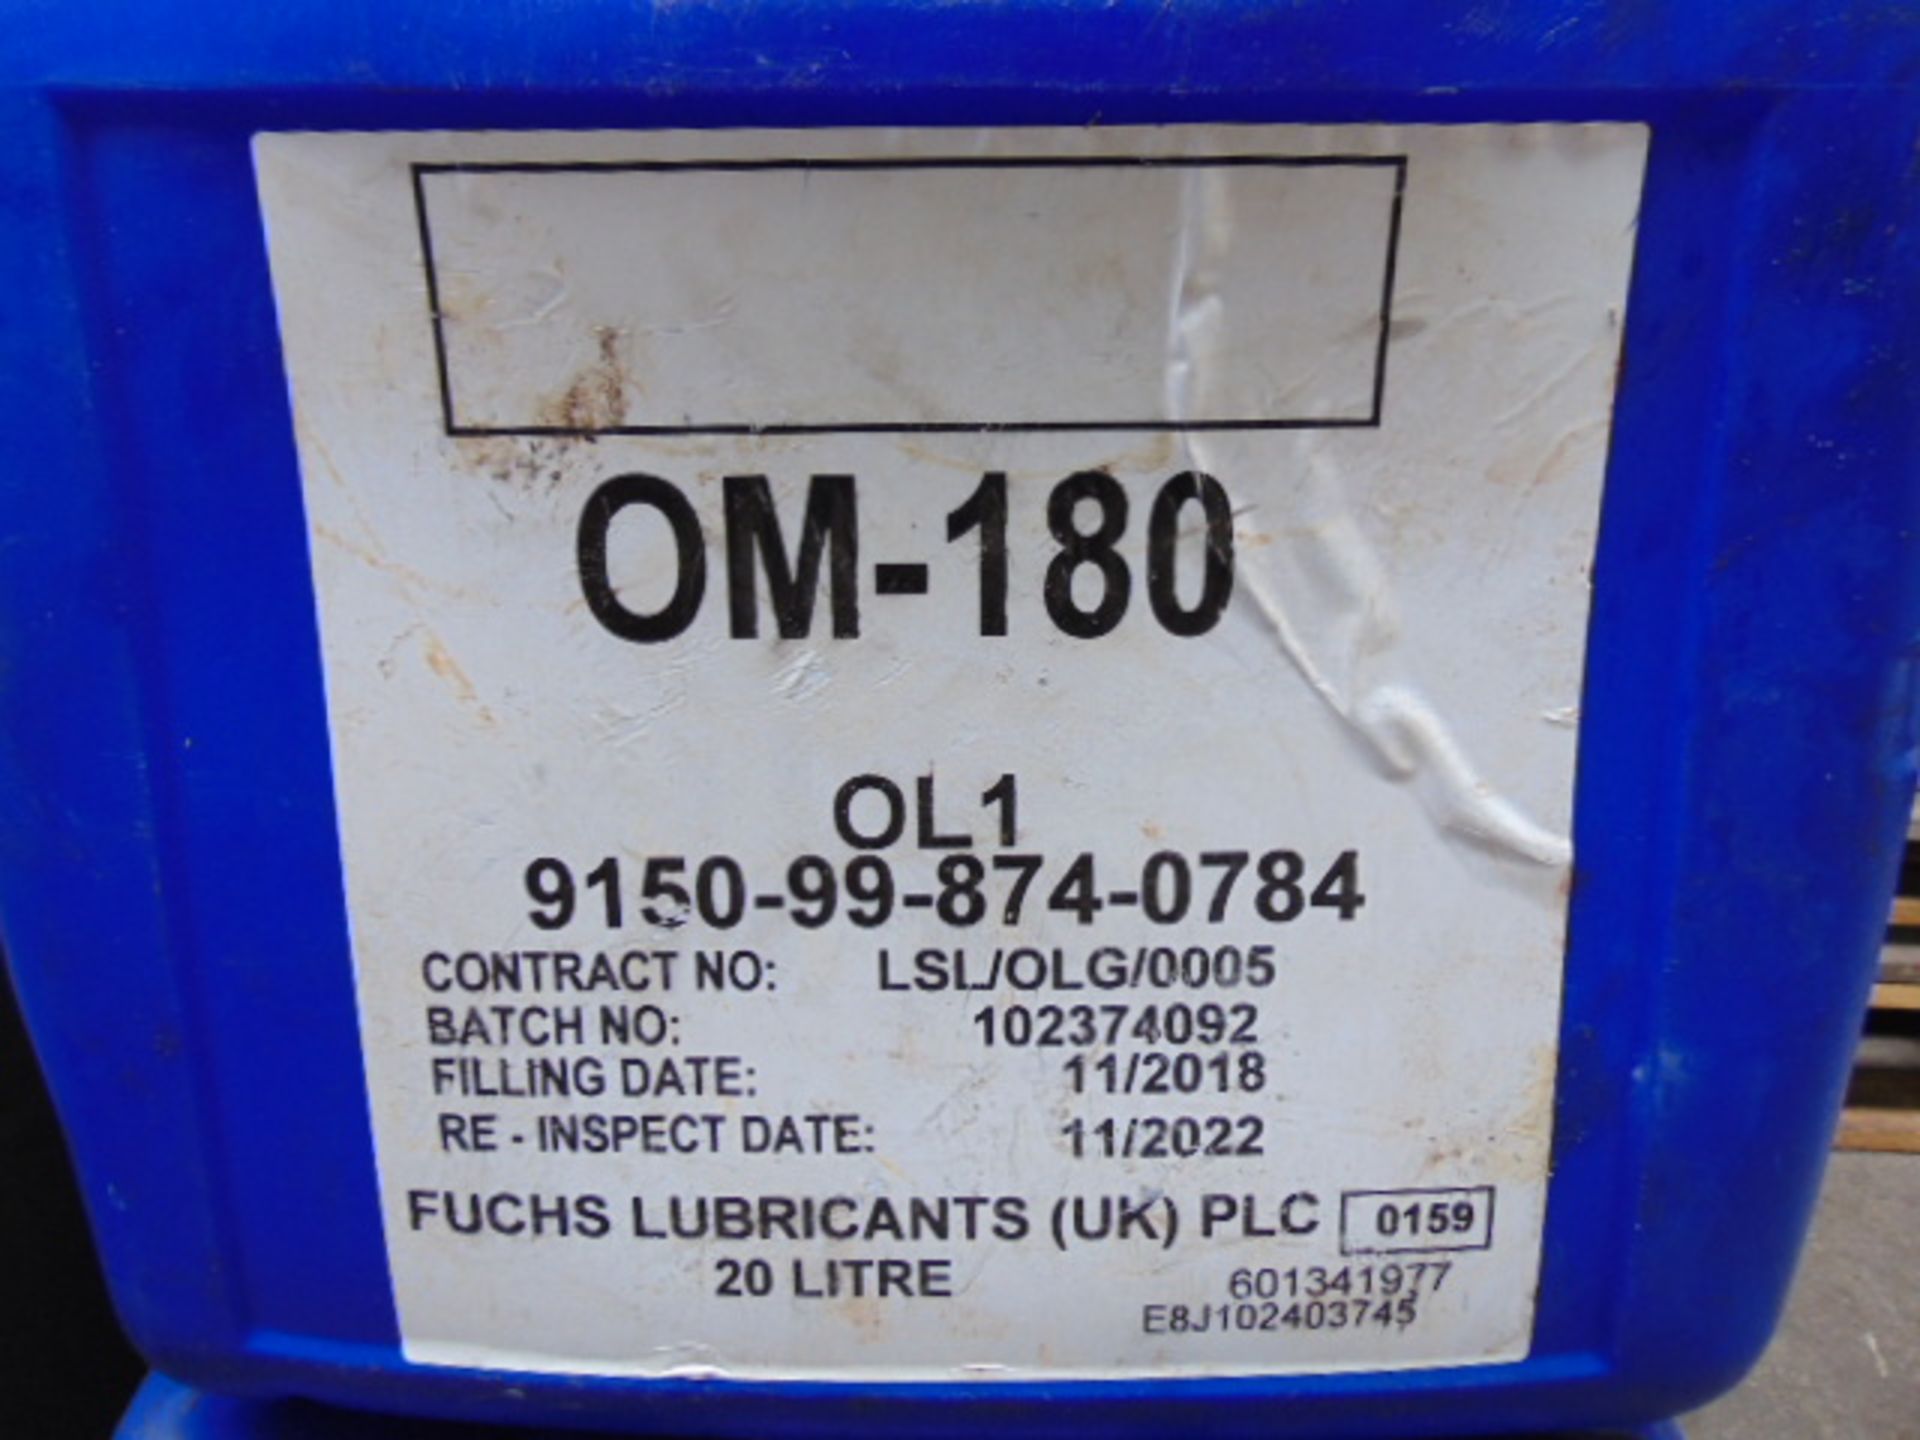 6 x Unissued 20L Drums of OM-180 High Quality Air Compressor Lubricating Oil - Image 2 of 2